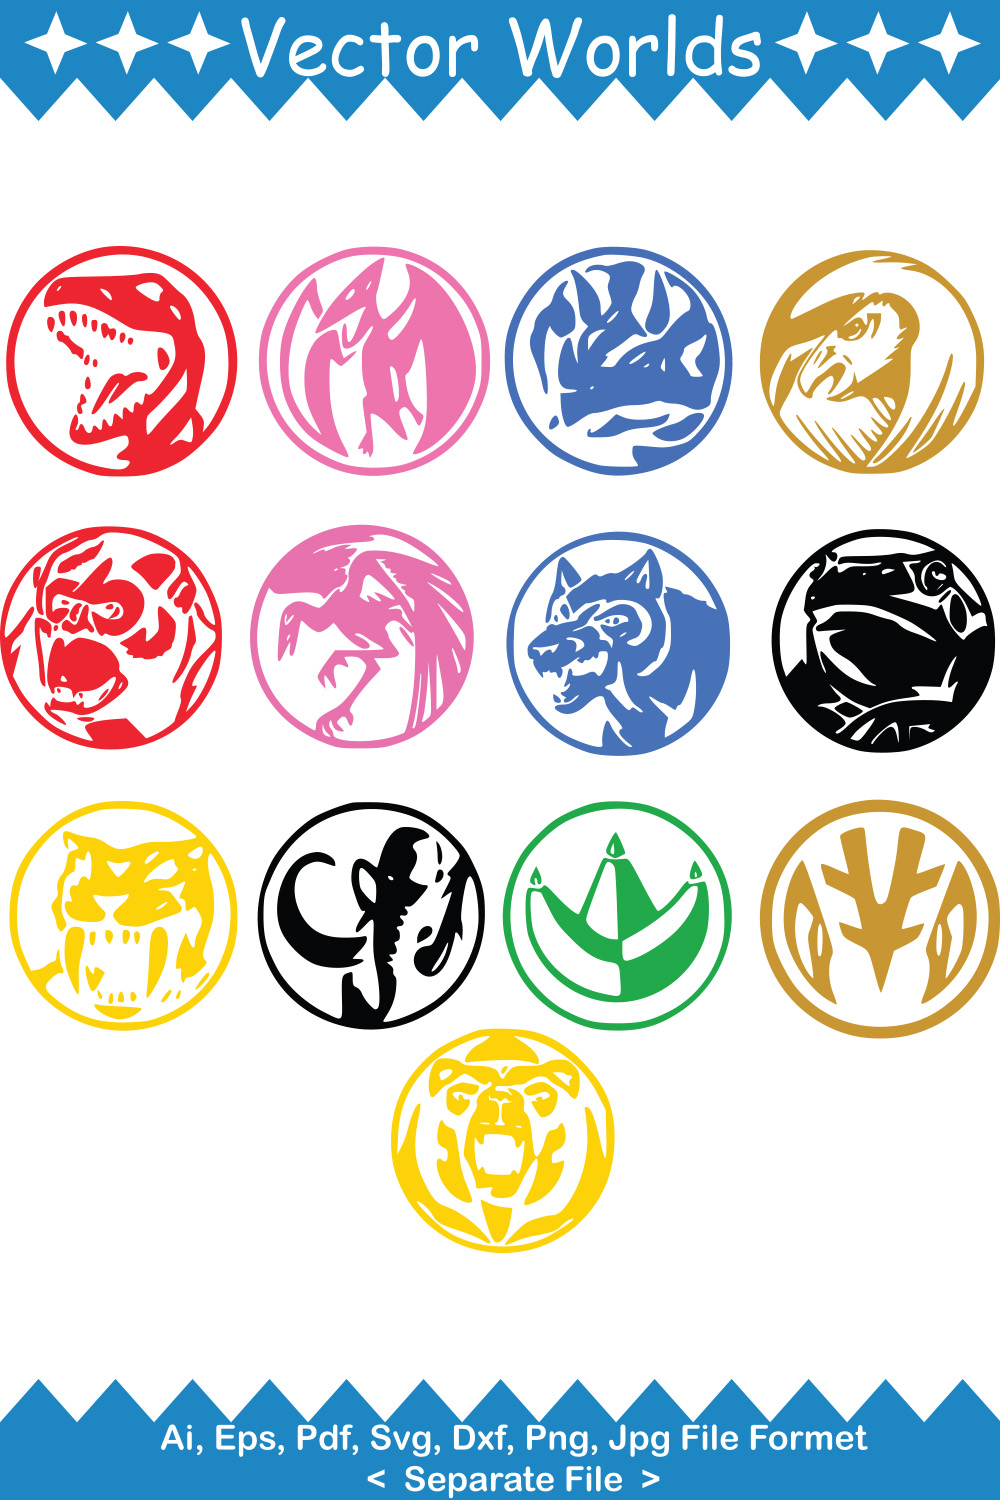 Power Rangers designs, themes, templates and downloadable graphic